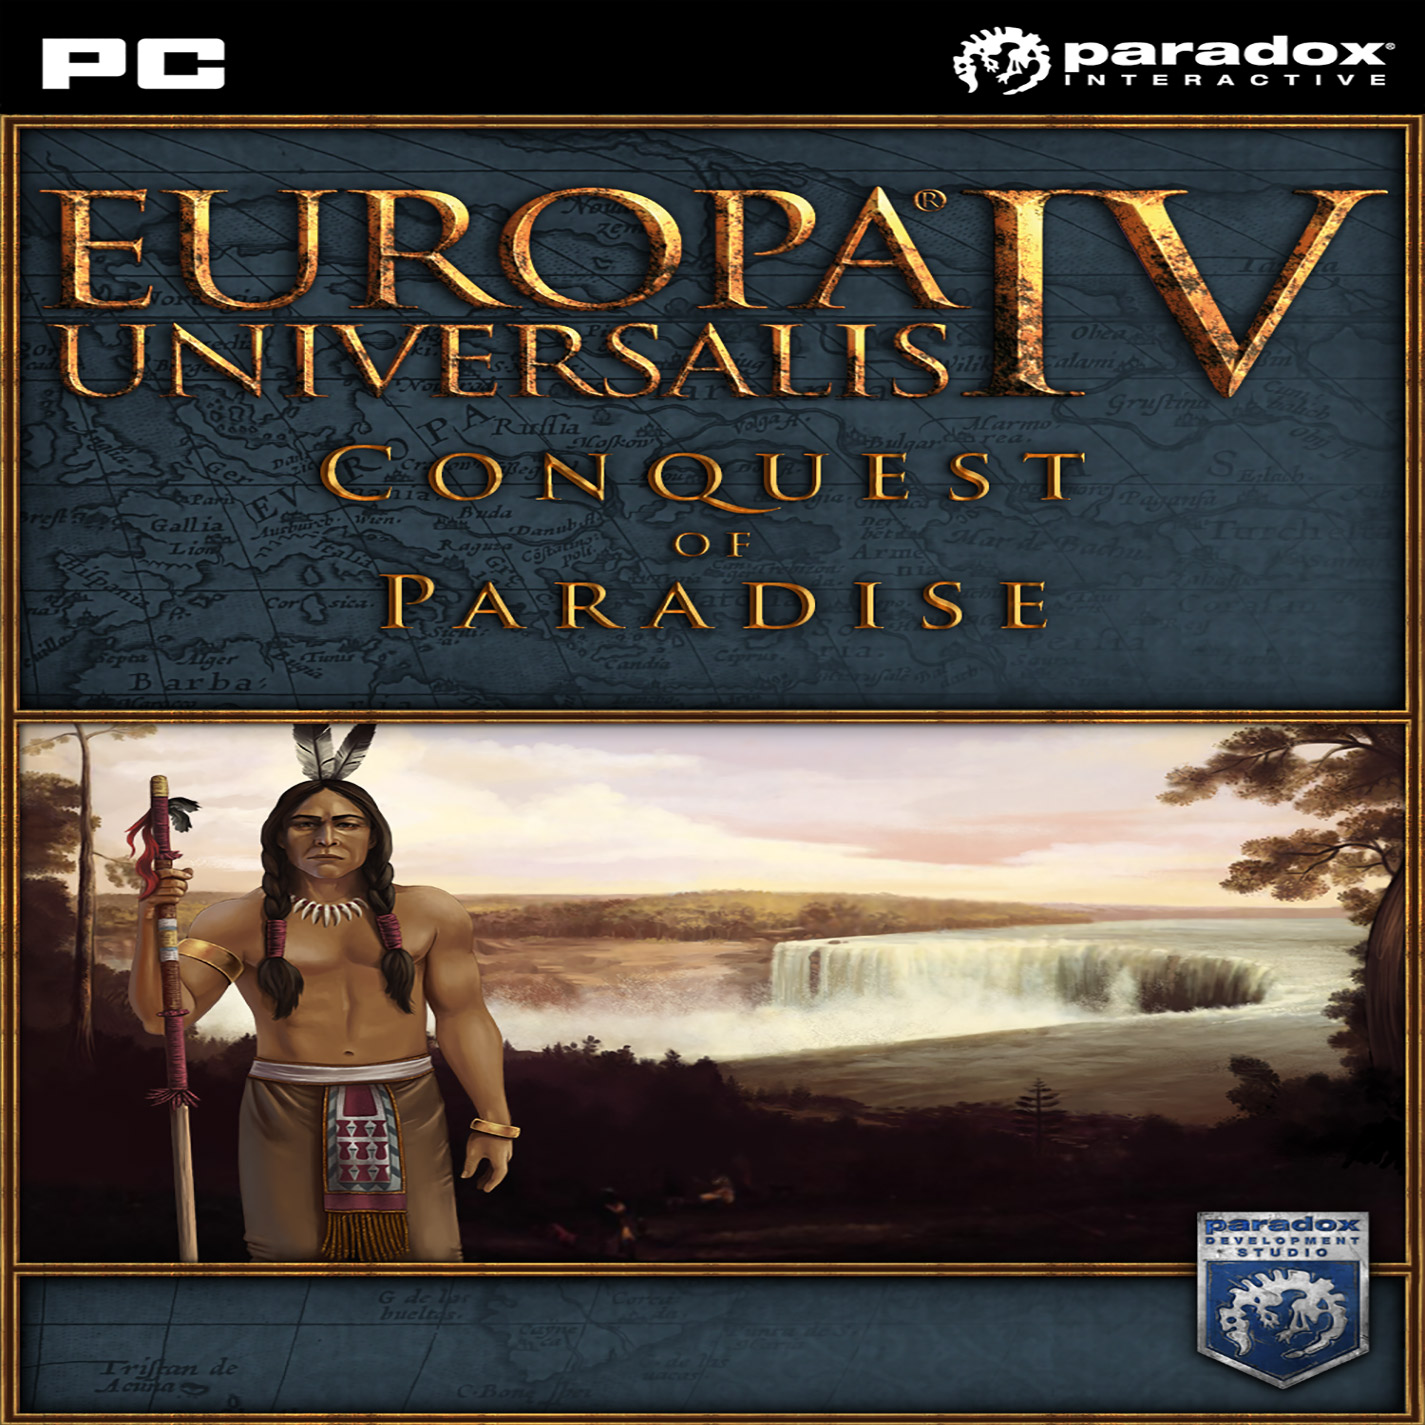 Europa Universalis IV: Conquest of Paradise - predn CD obal